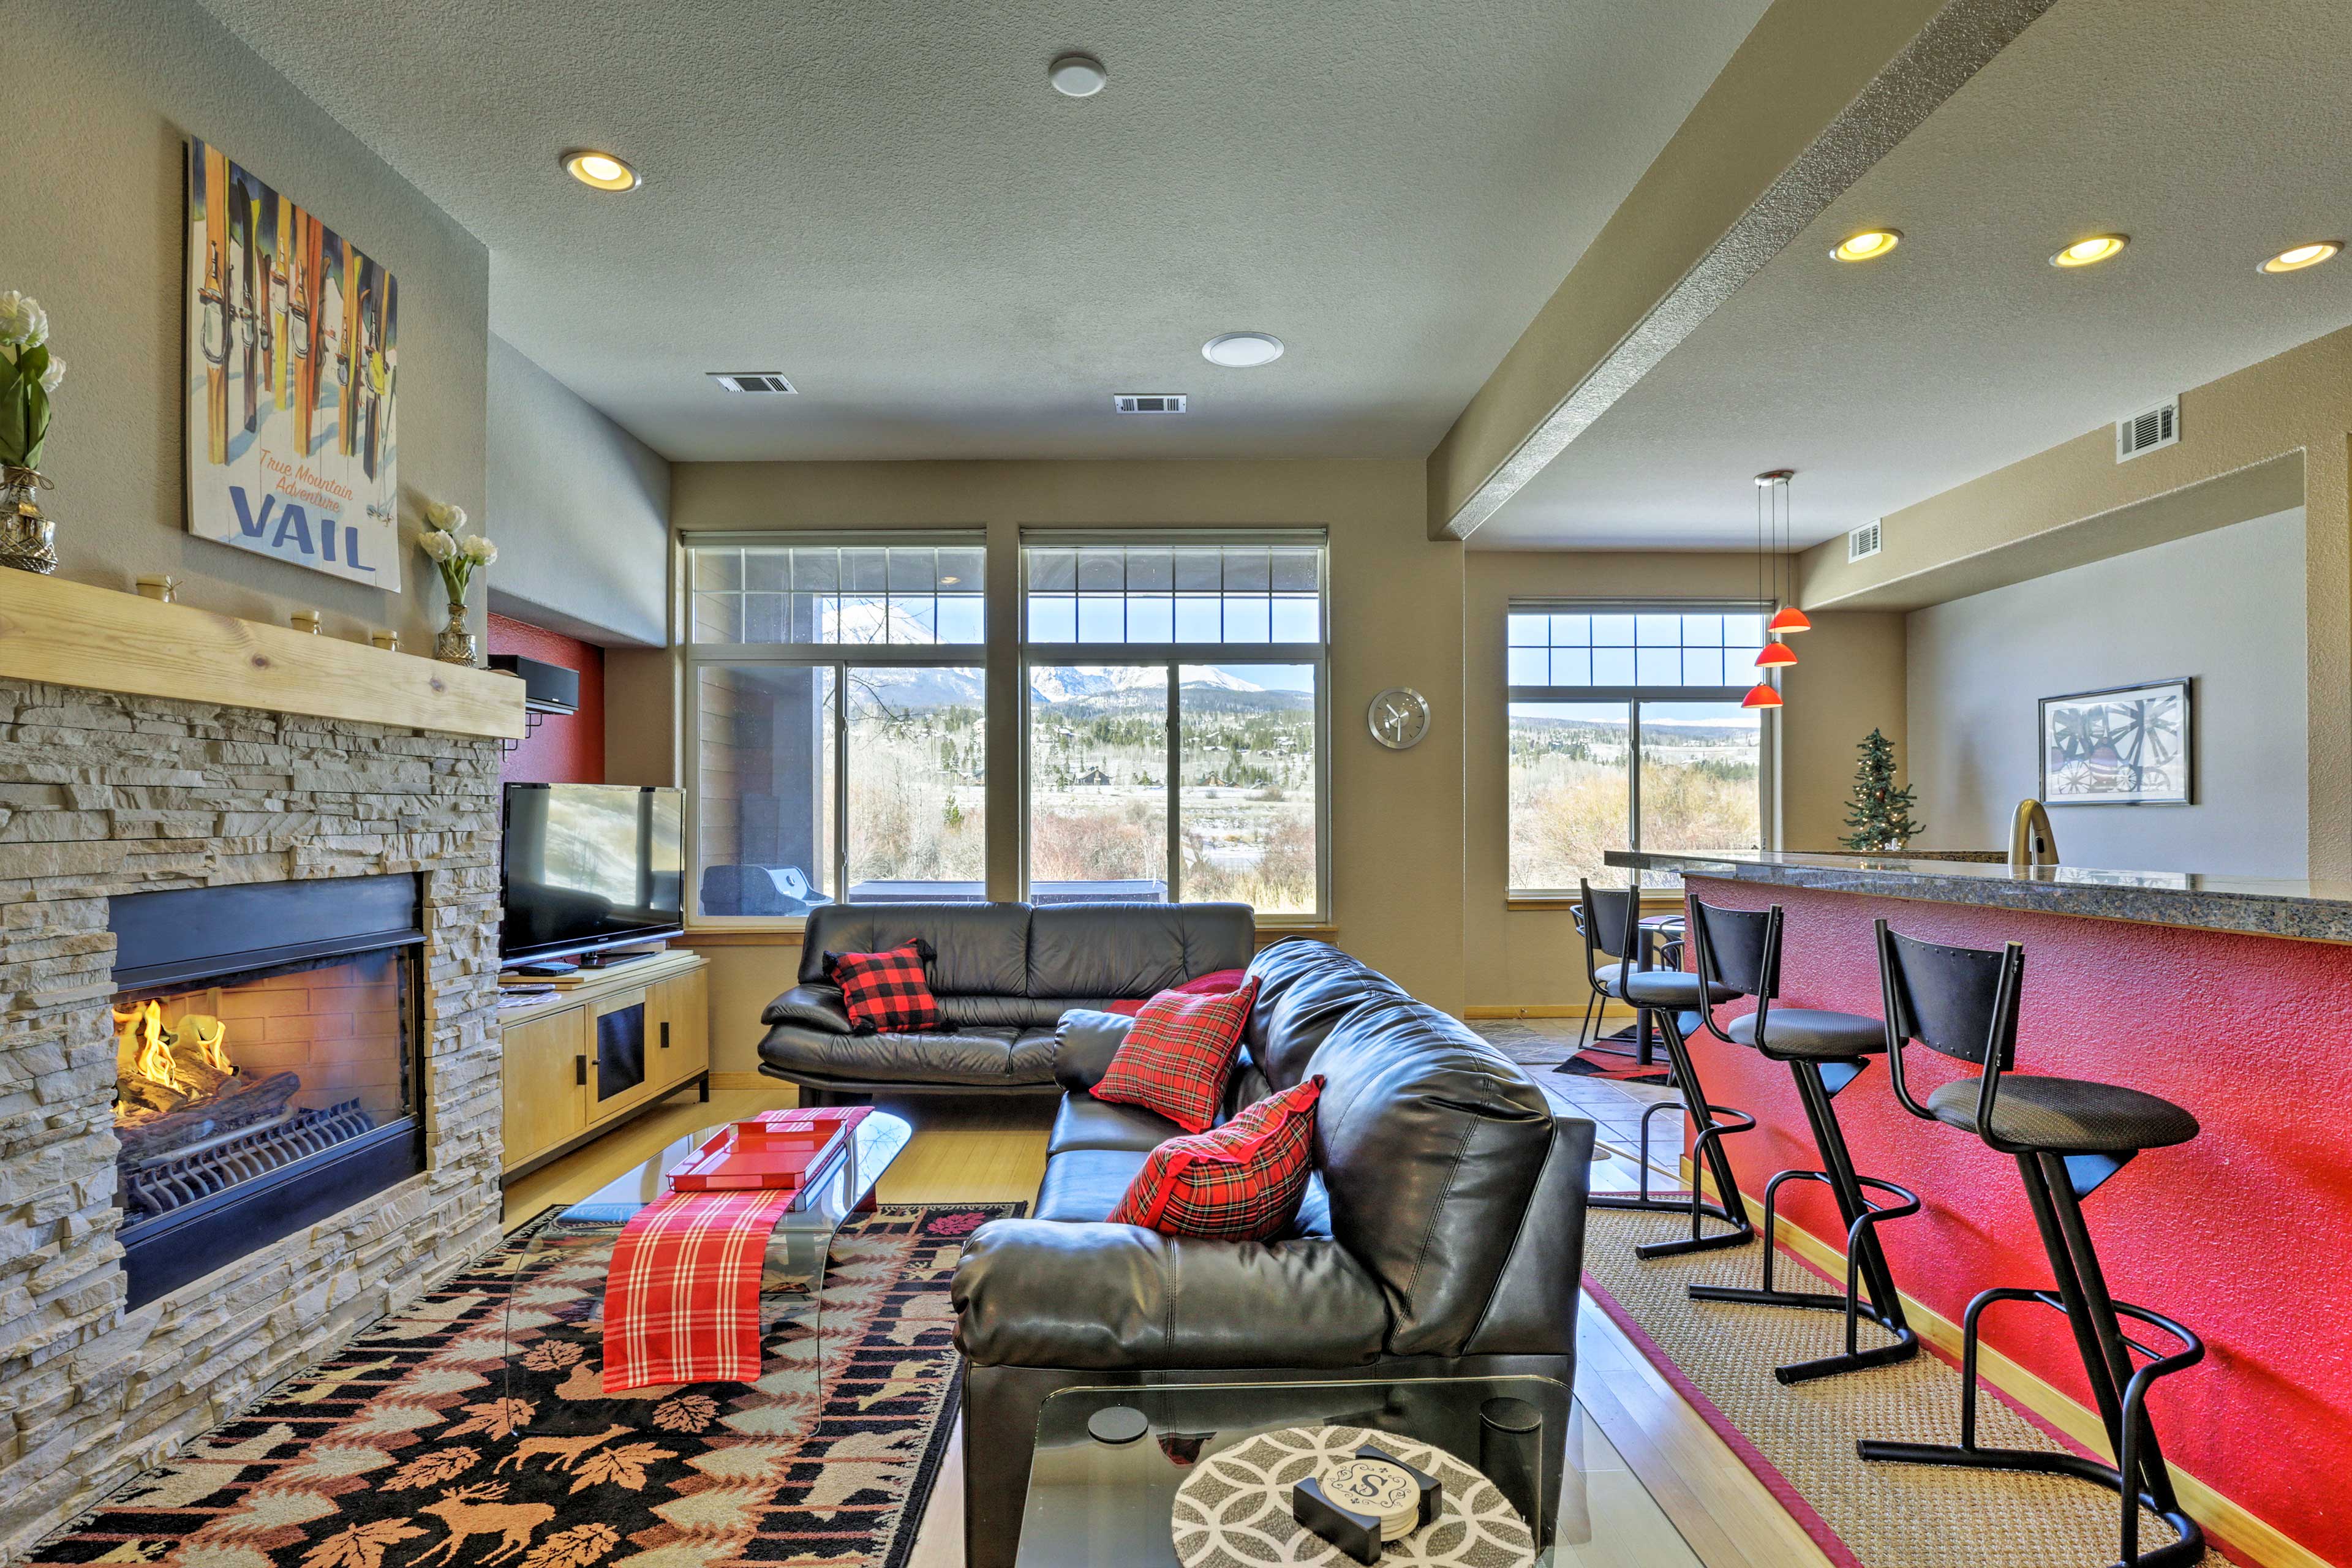 Base your outdoor adventures in the surrounding mountain from this townhome.